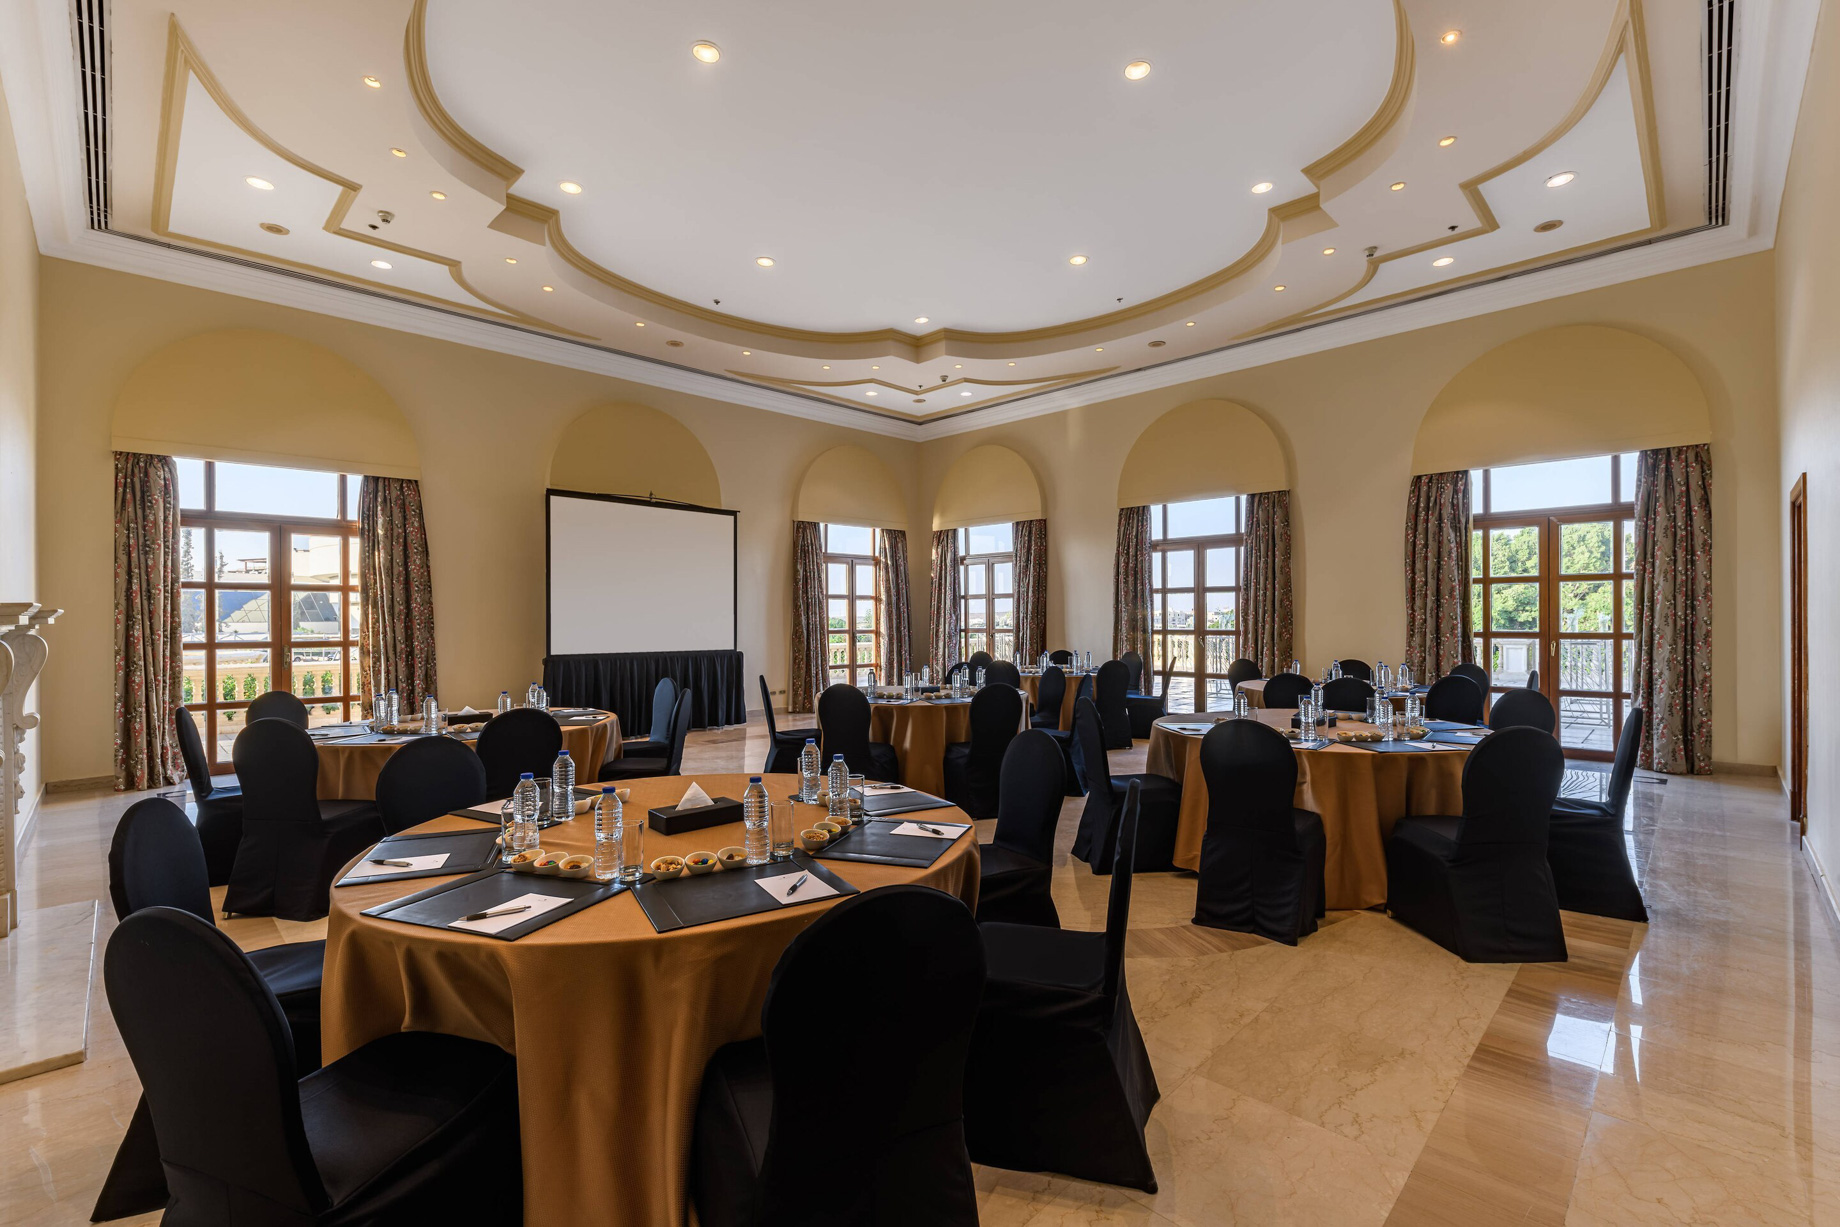 JW Marriott Hotel Cairo – Cairo, Egypt – Clubhouse Victoria Meeting Room Banquet Setup